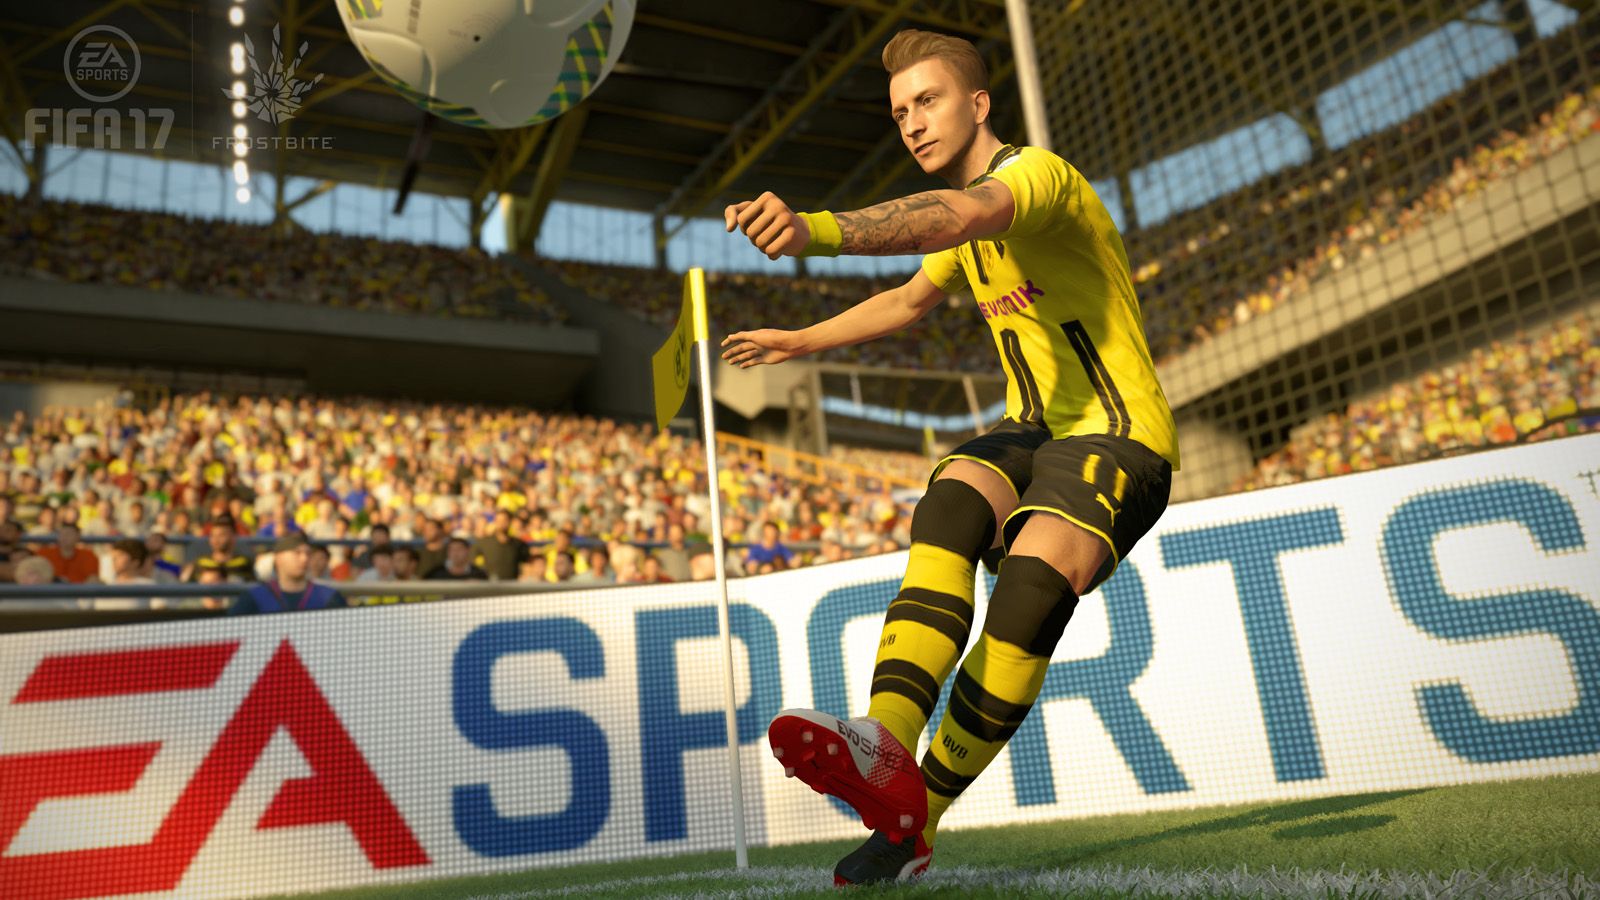 fifa 17 preview image 1